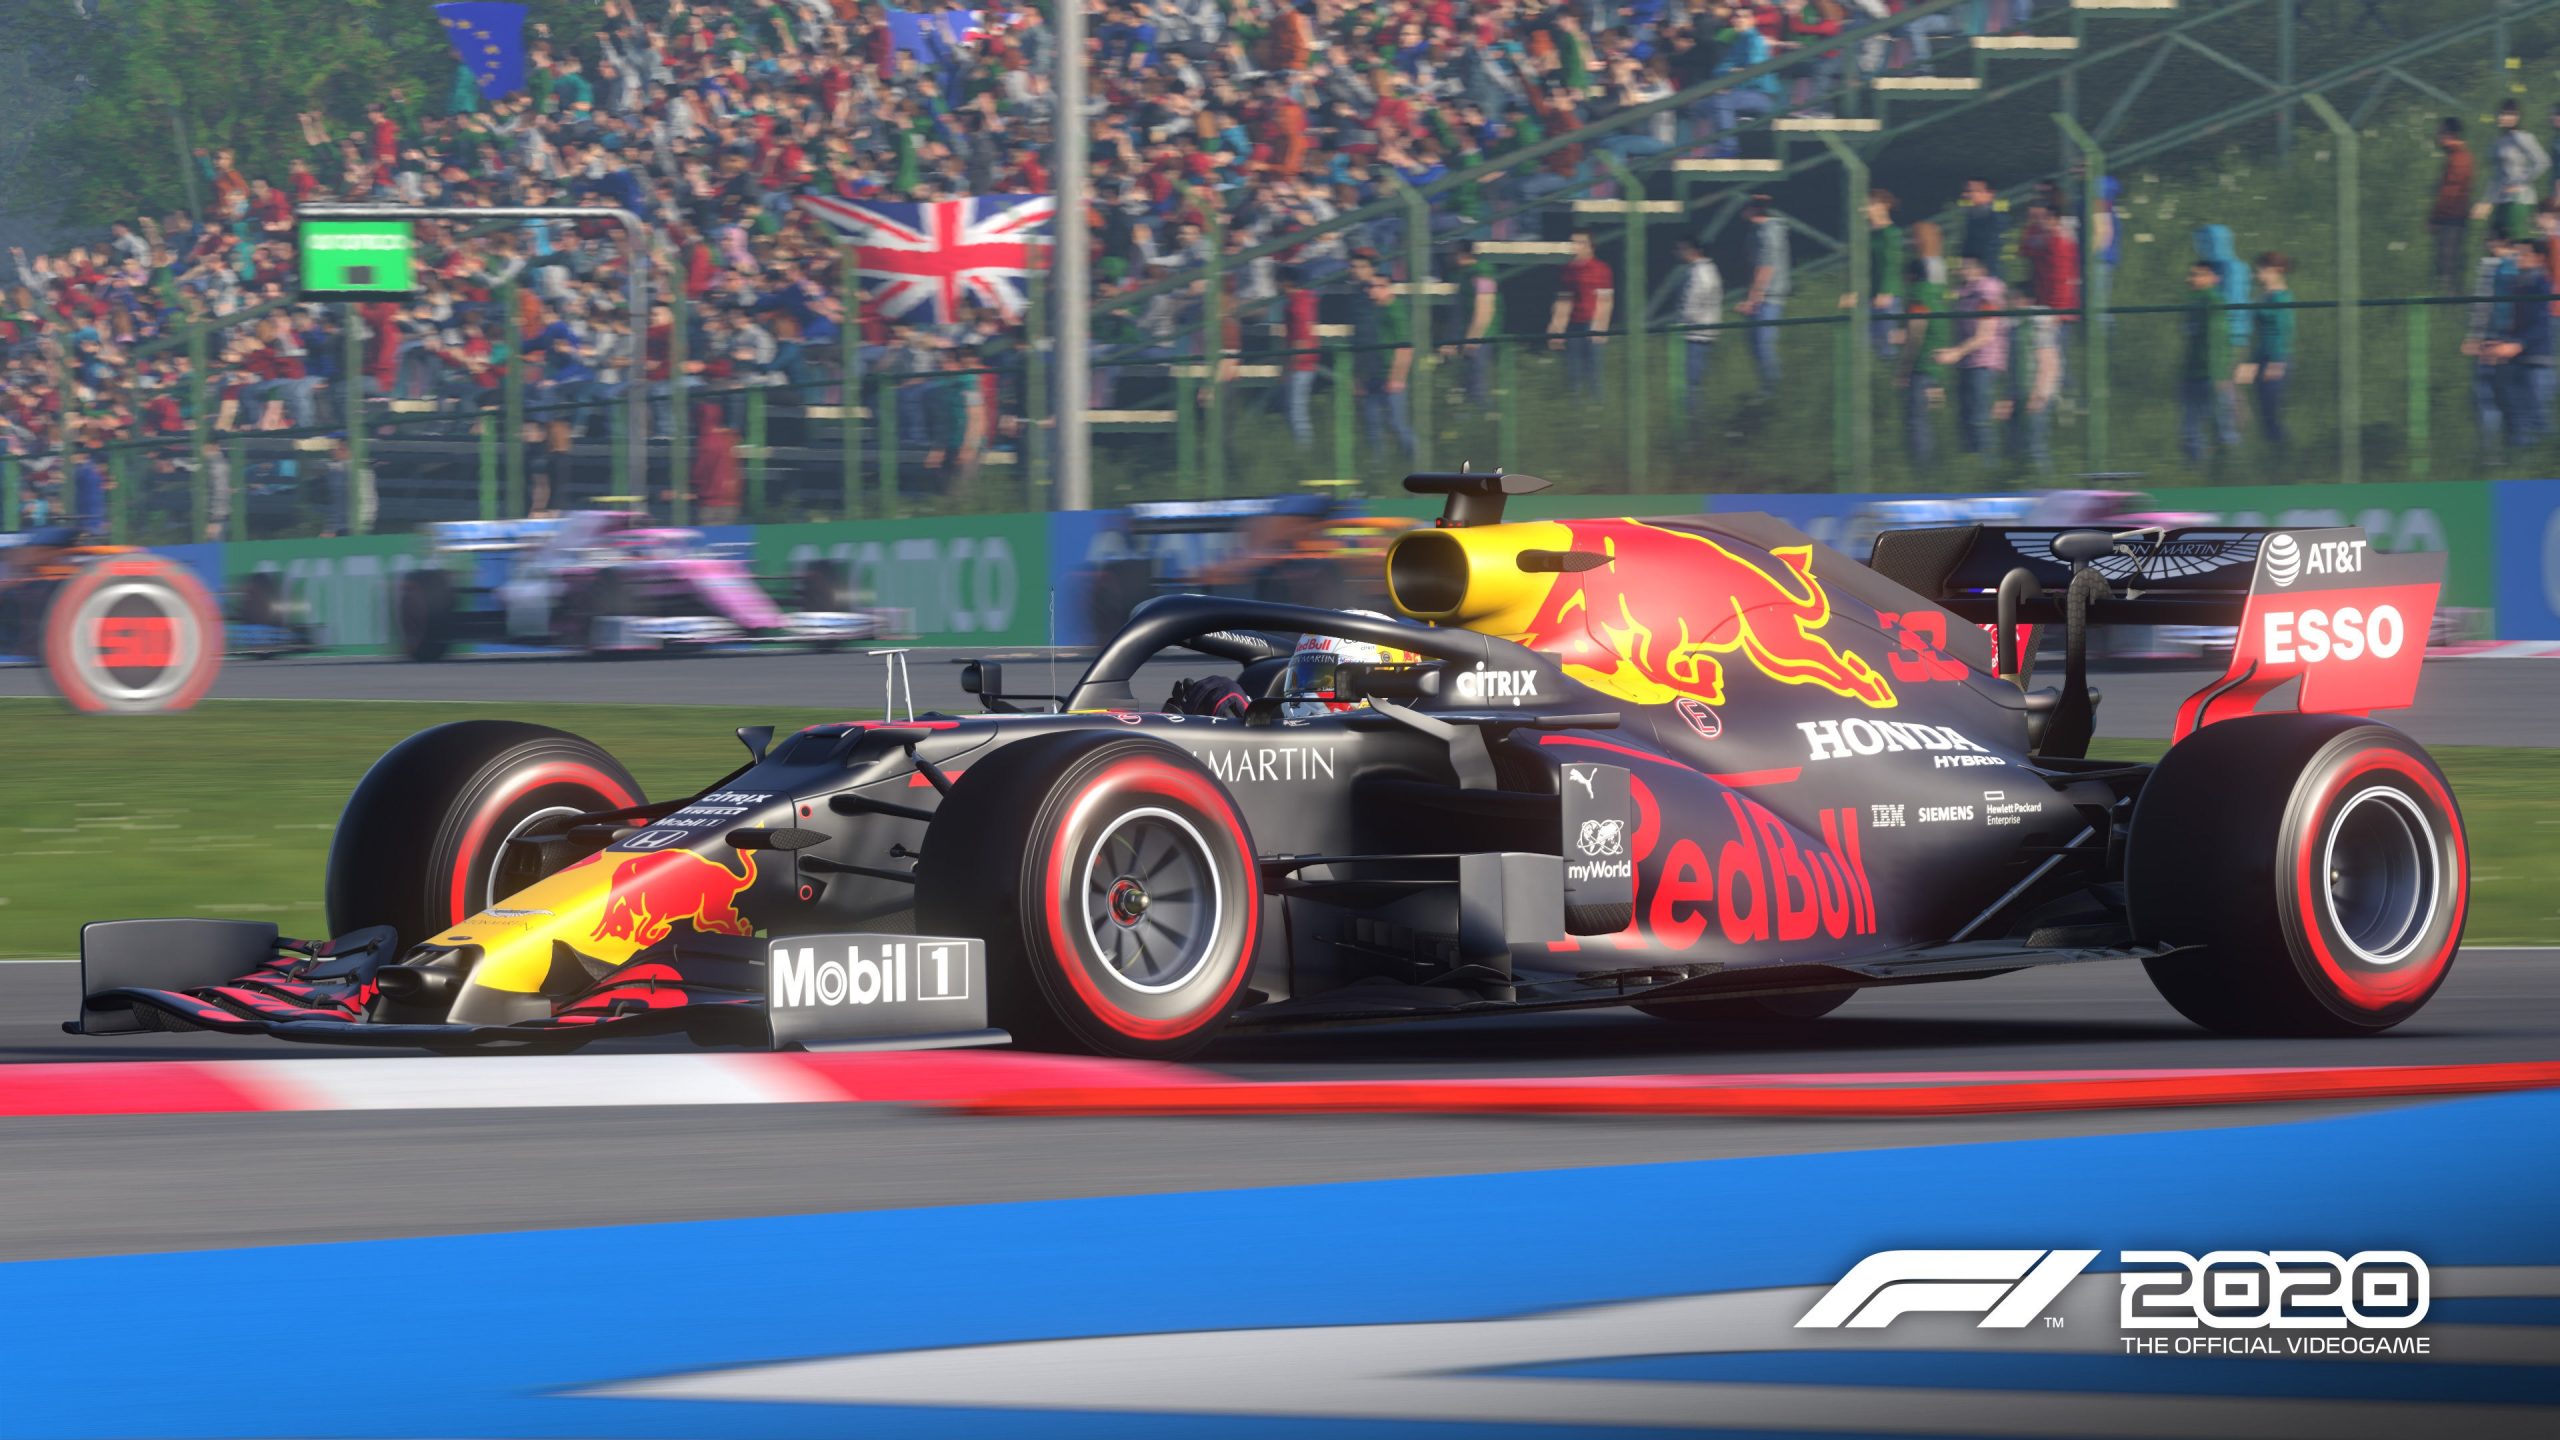 Release The official F1 2020 videogame Articles